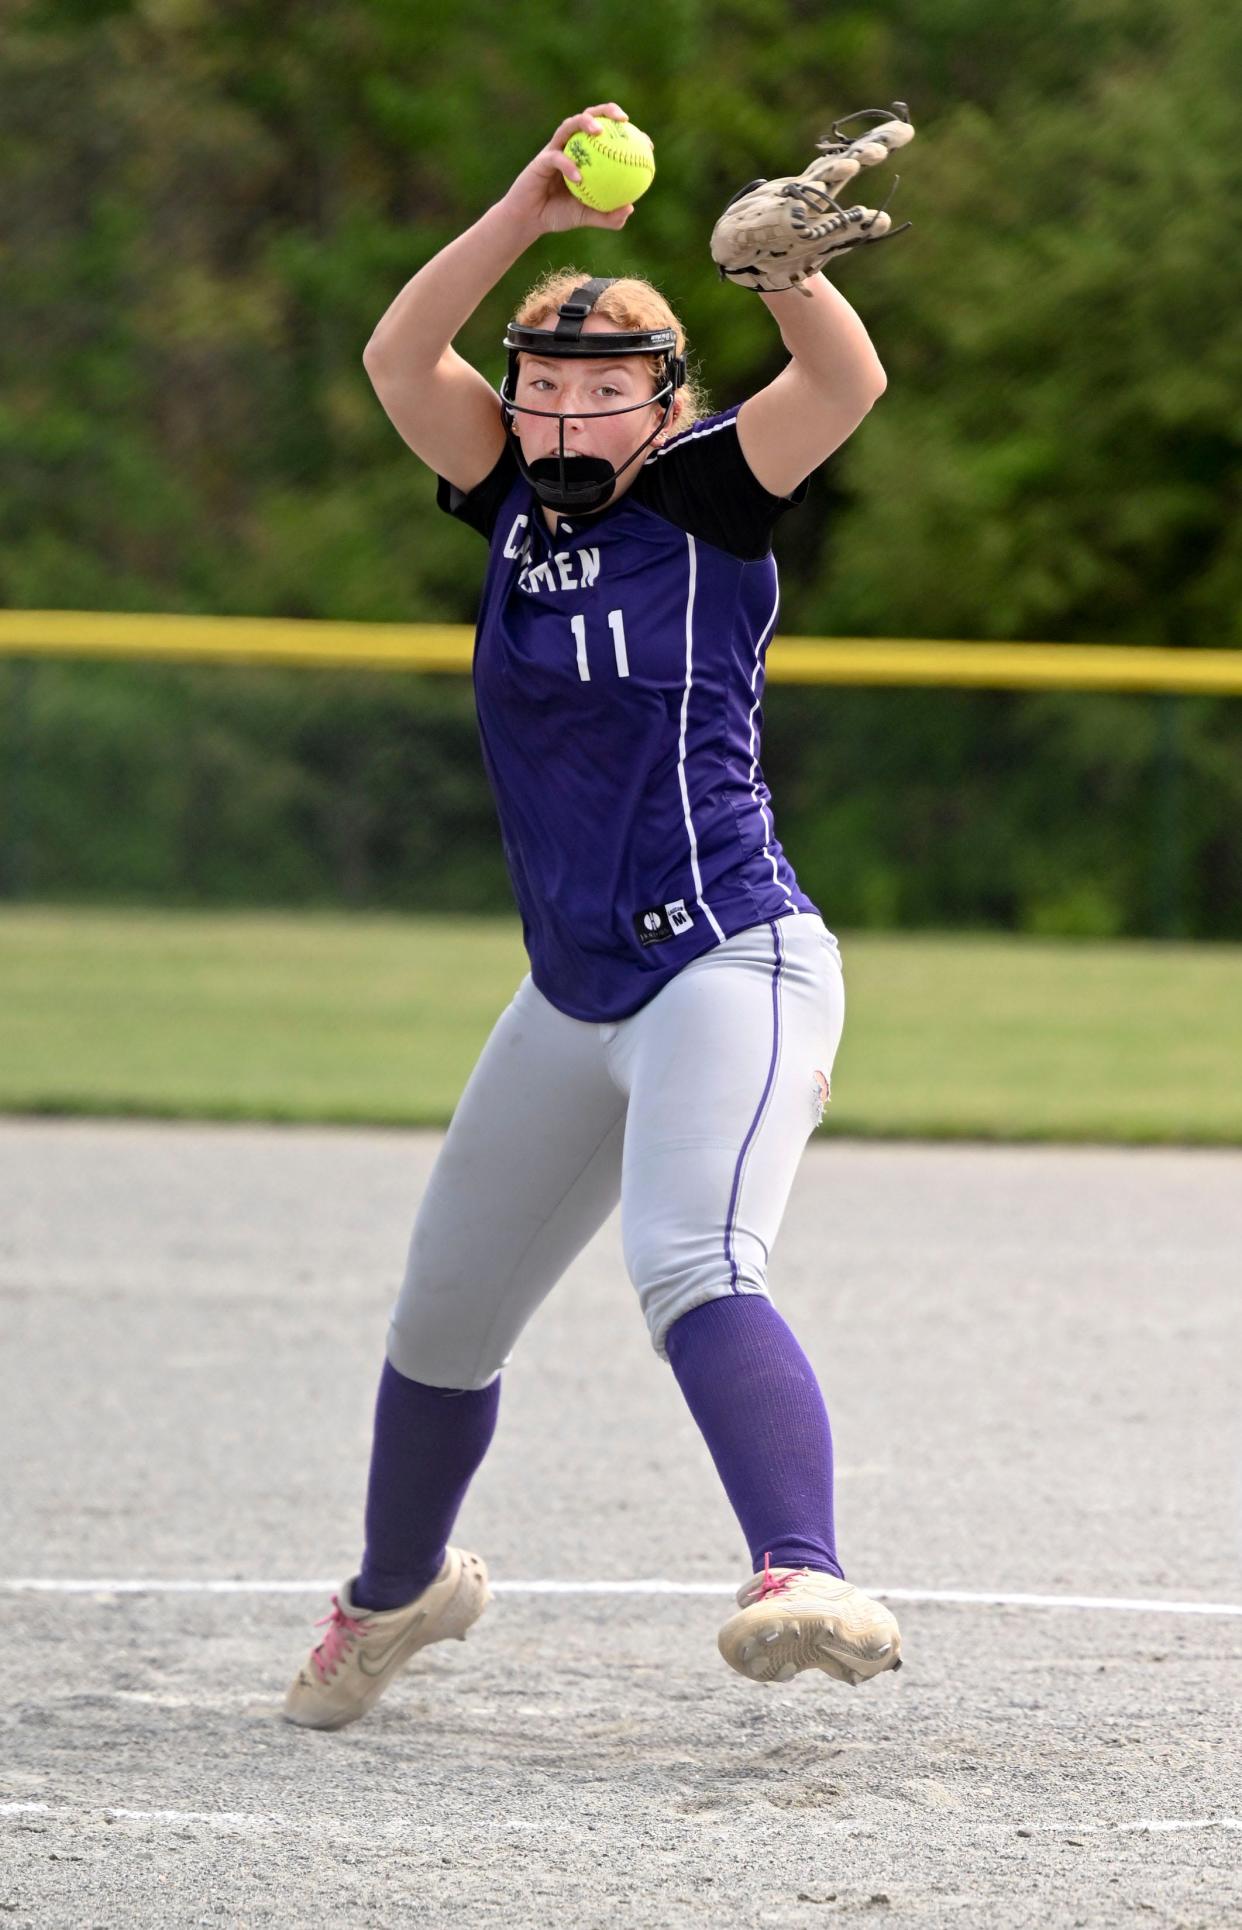 Bourne pitcher Jadyn Morrell winds up to throw.